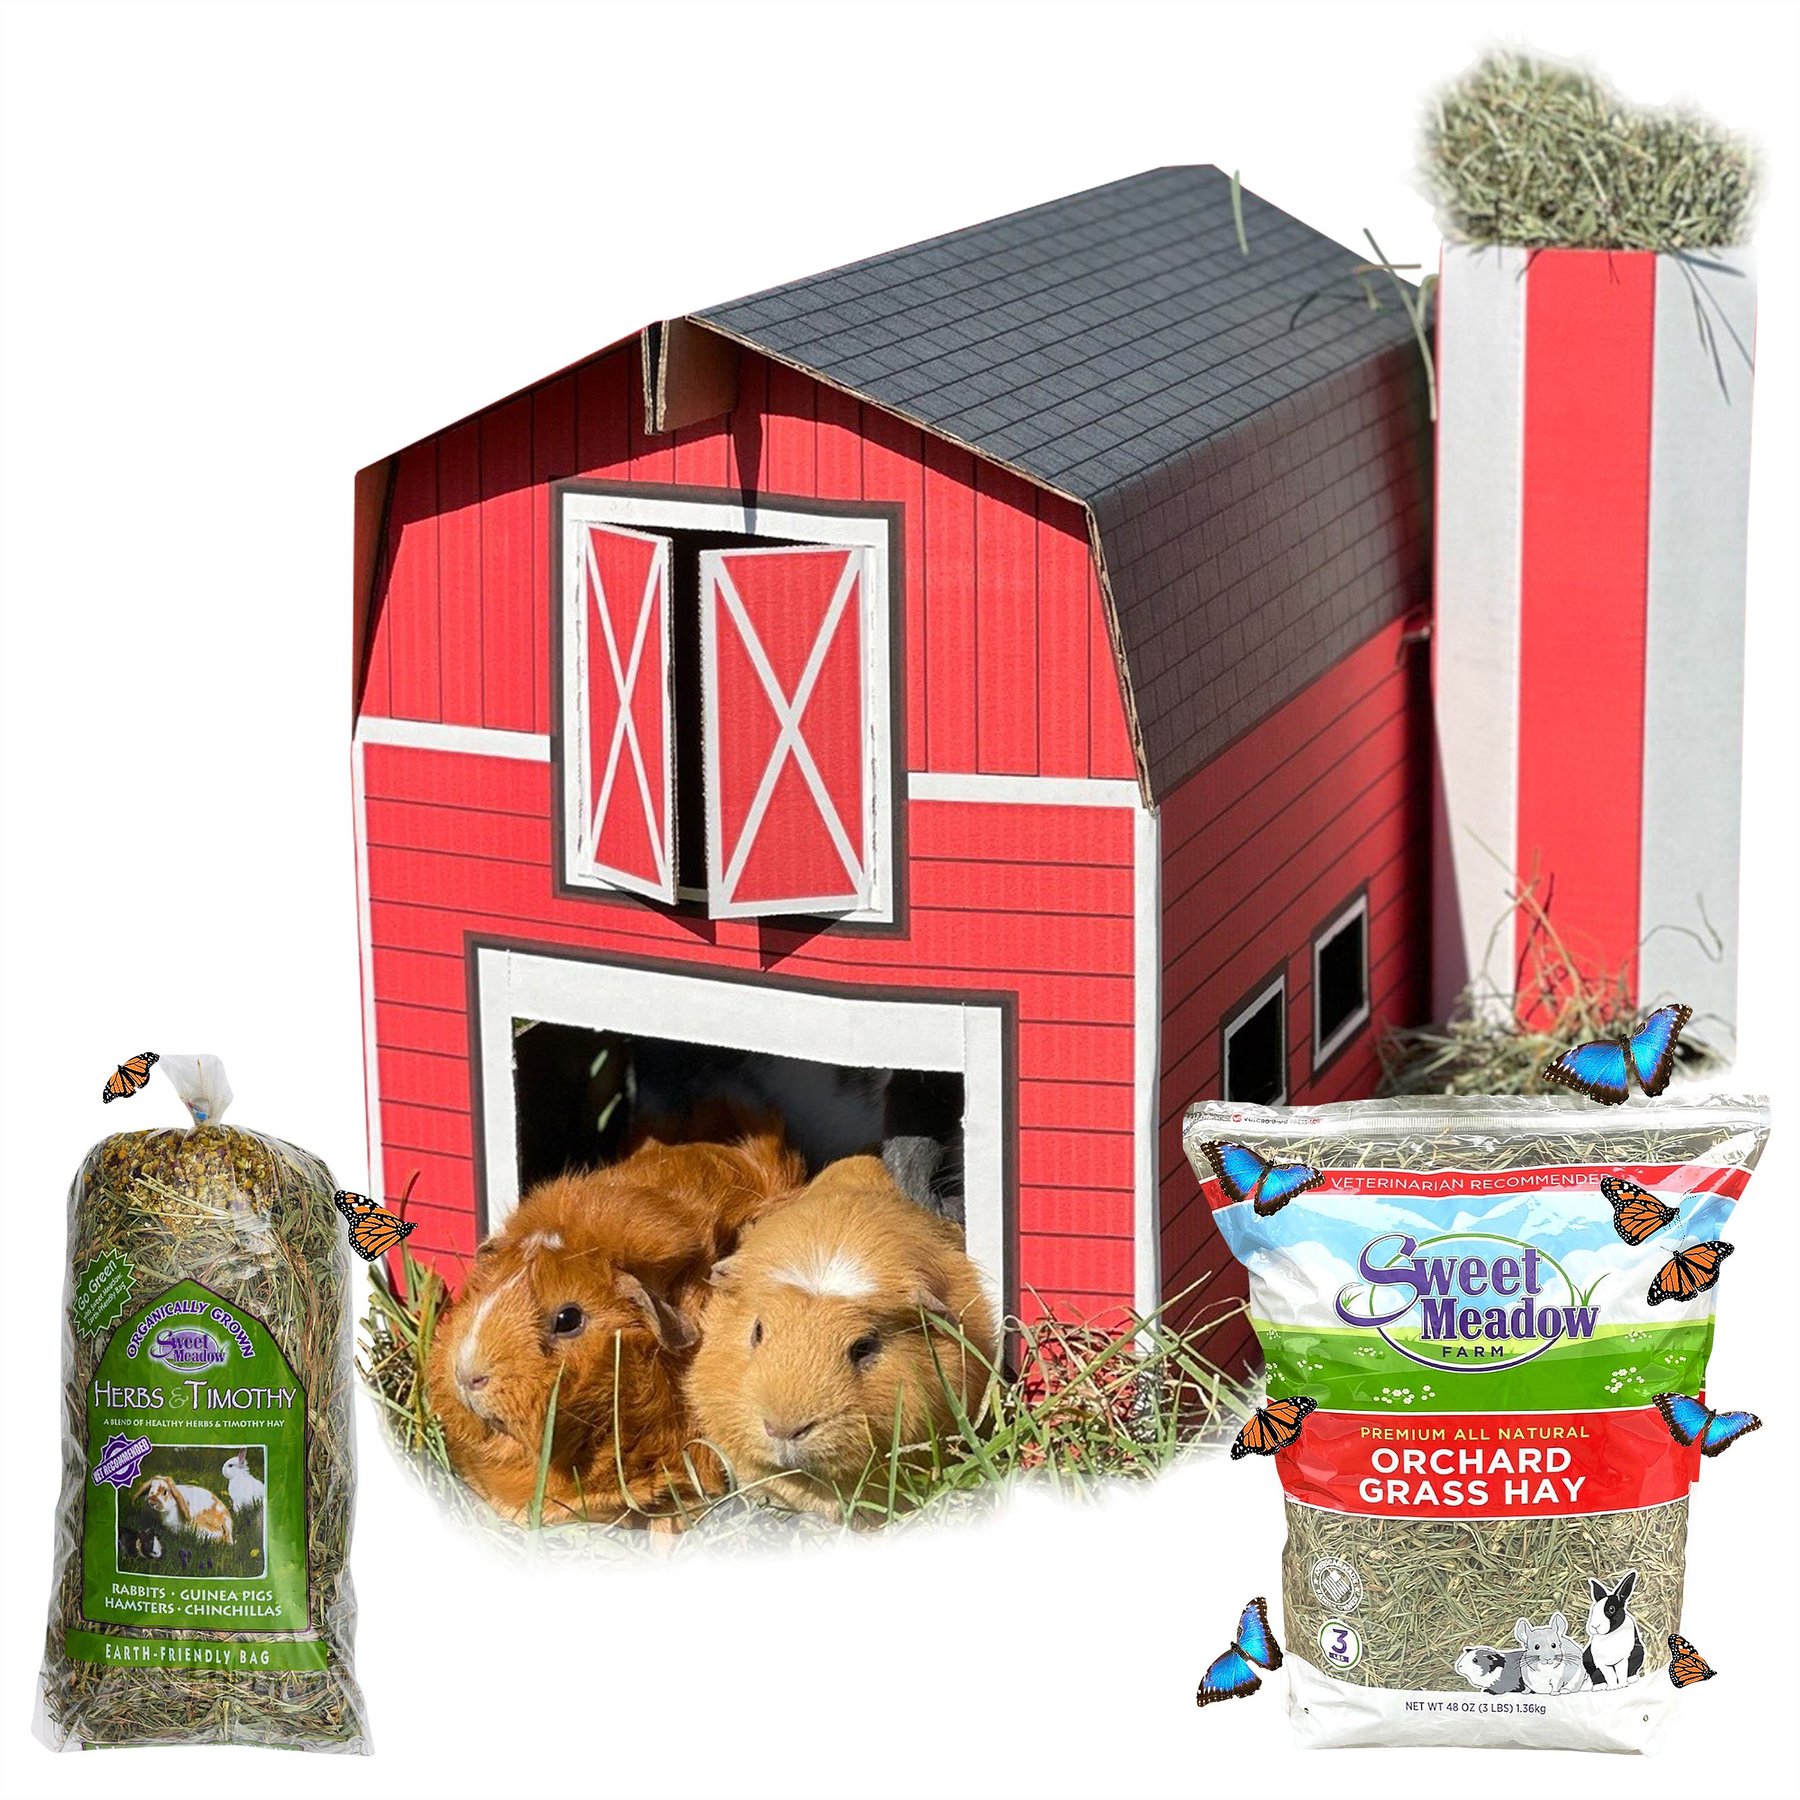 Peter's Woven Grass Hide-A-Way Hut for Small Animals at Tractor Supply Co.